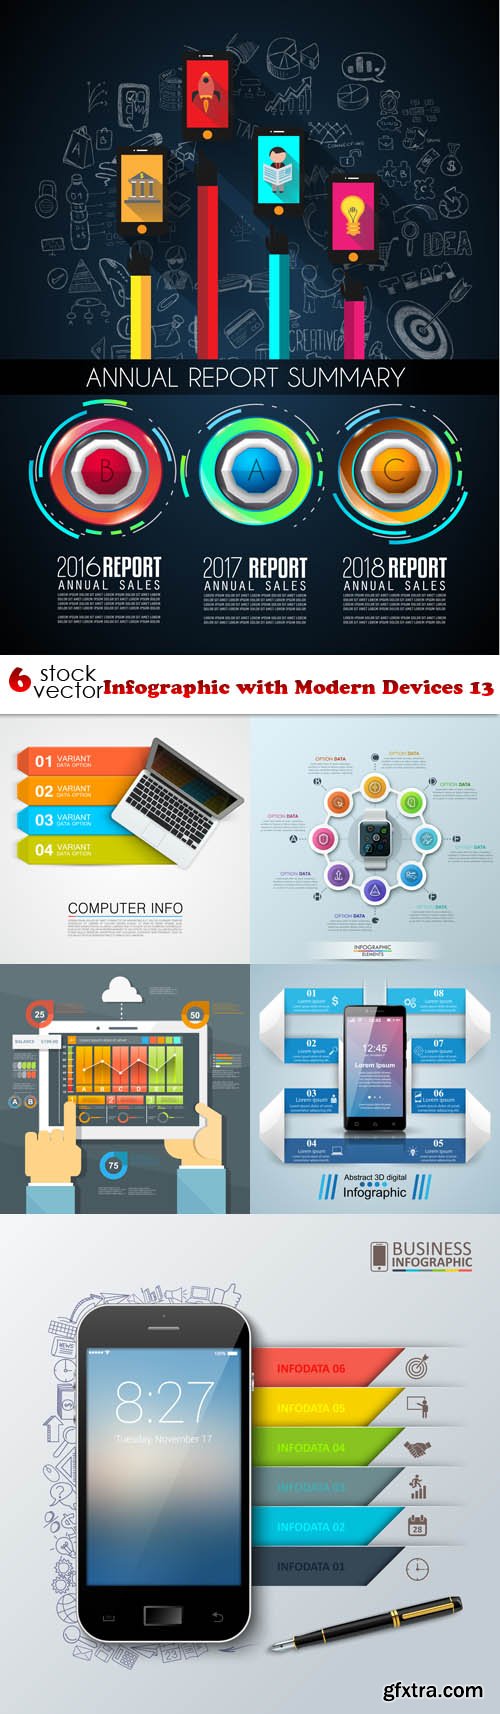 Vectors - Infographic with Modern Devices 13